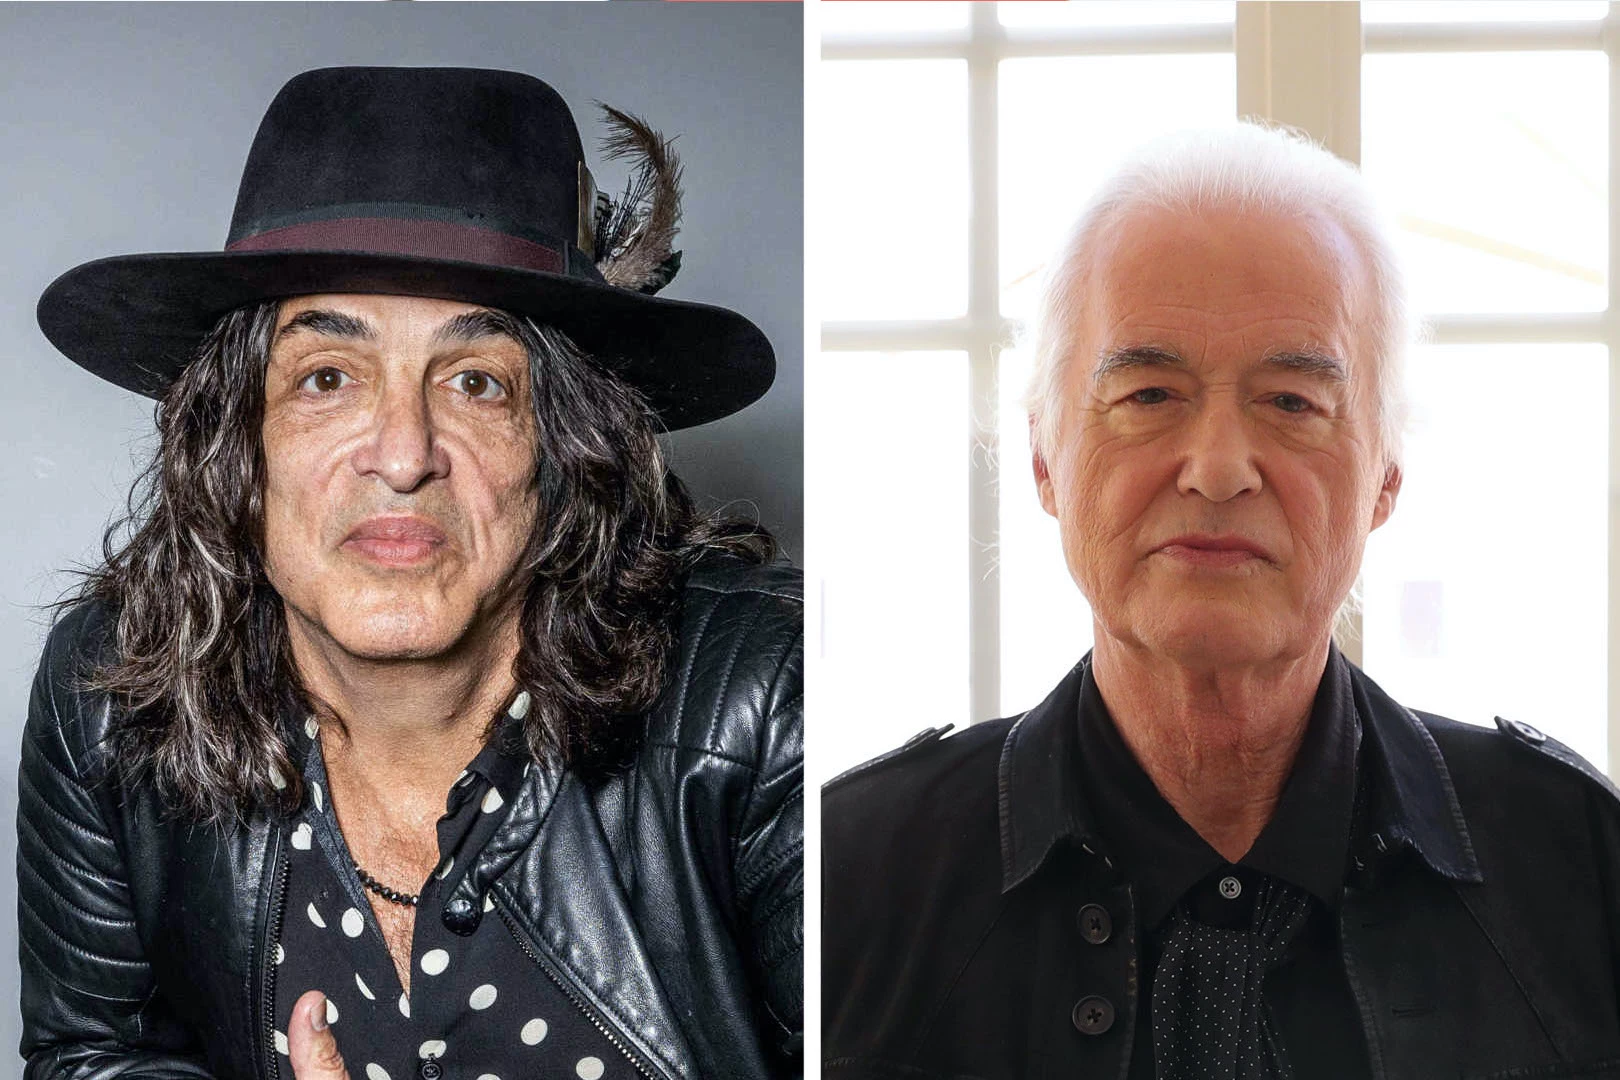 https://townsquare.media/site/366/files/2022/10/attachment-kiss_paul_stanley_led_zeppelin_jimmy_page.jpg